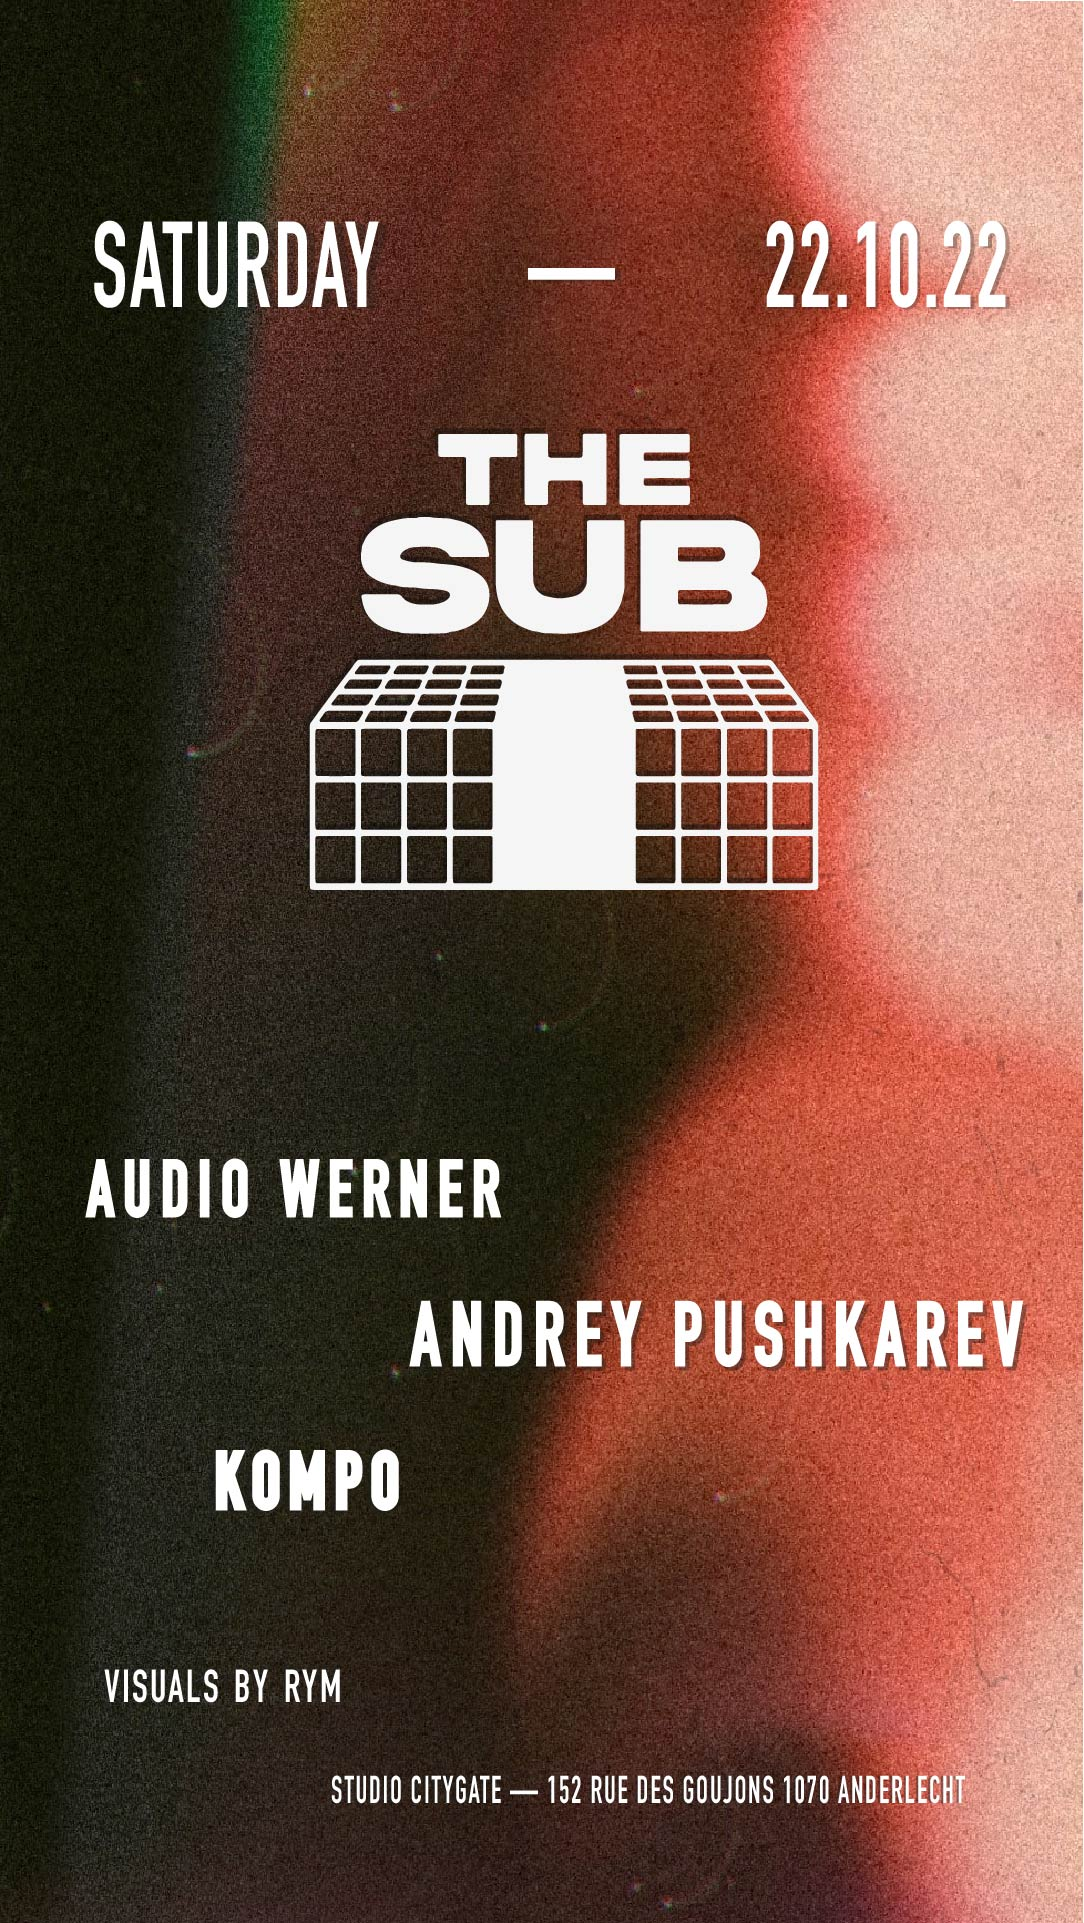 The Sub - Andrey Pushkarev • Audio Werner - Flyer front